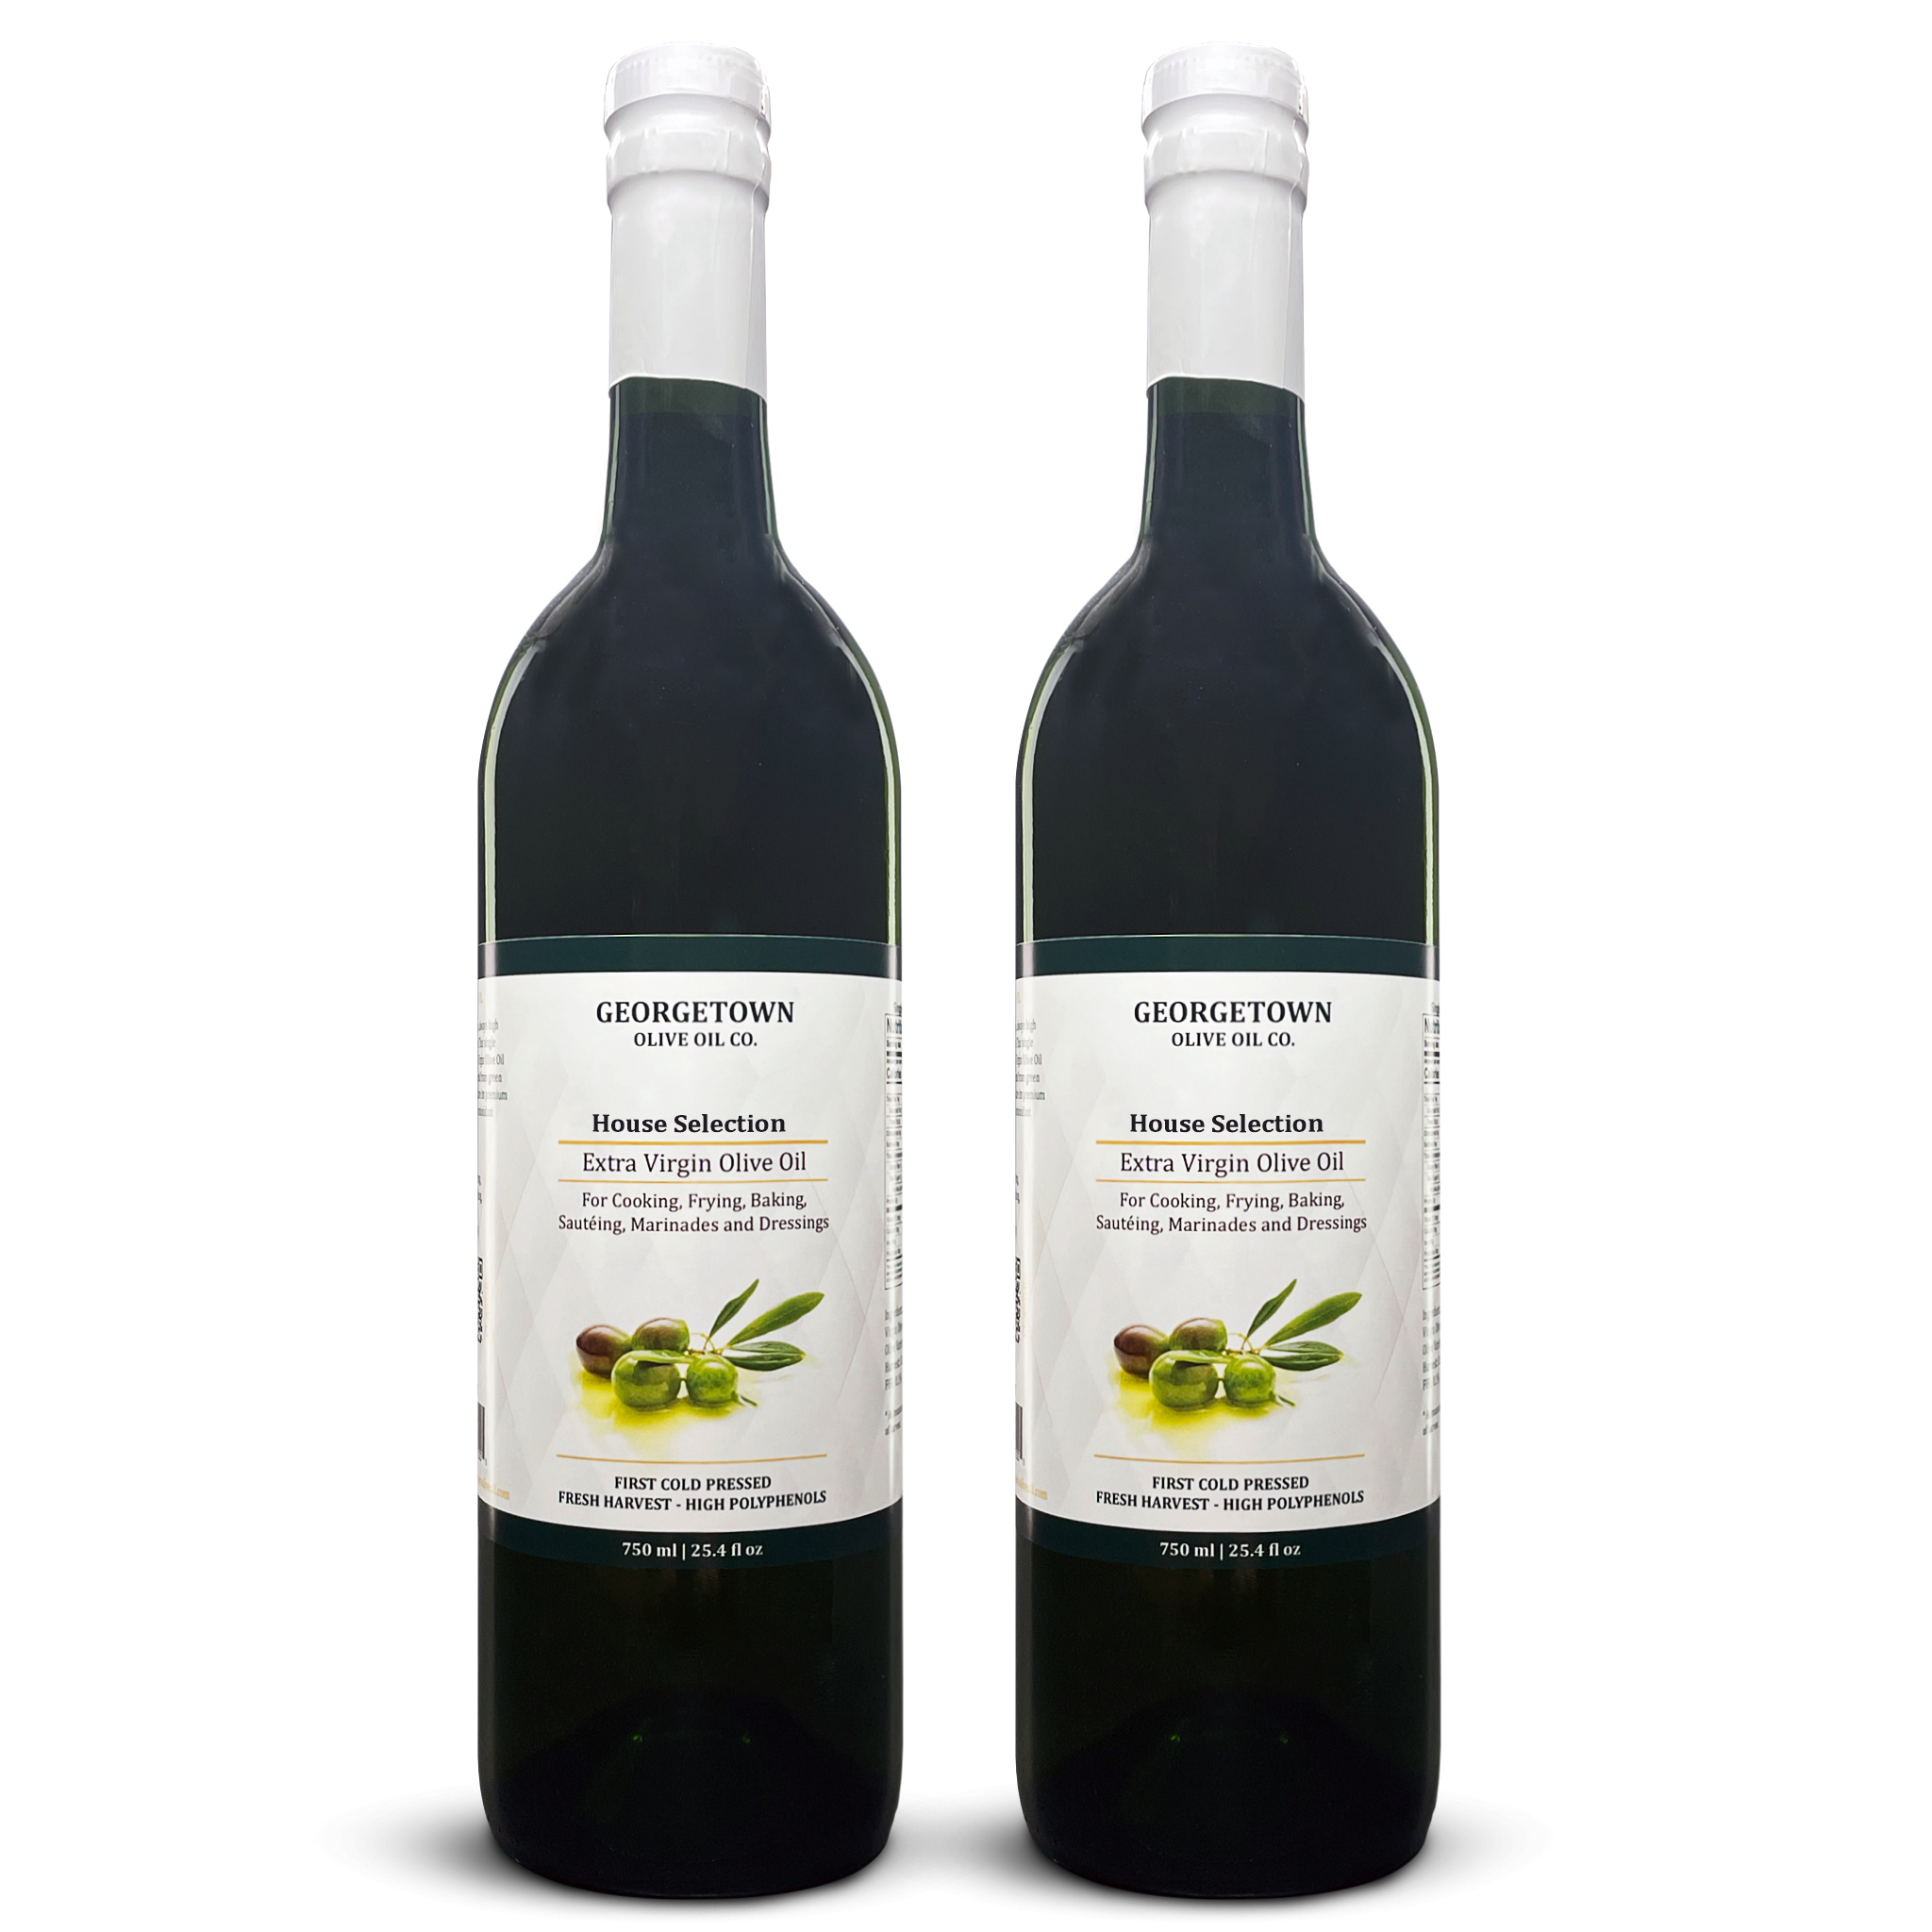 Extra Virgin Olive Oil for Cooking - 25.4oz Georgetown Olive Oil Co